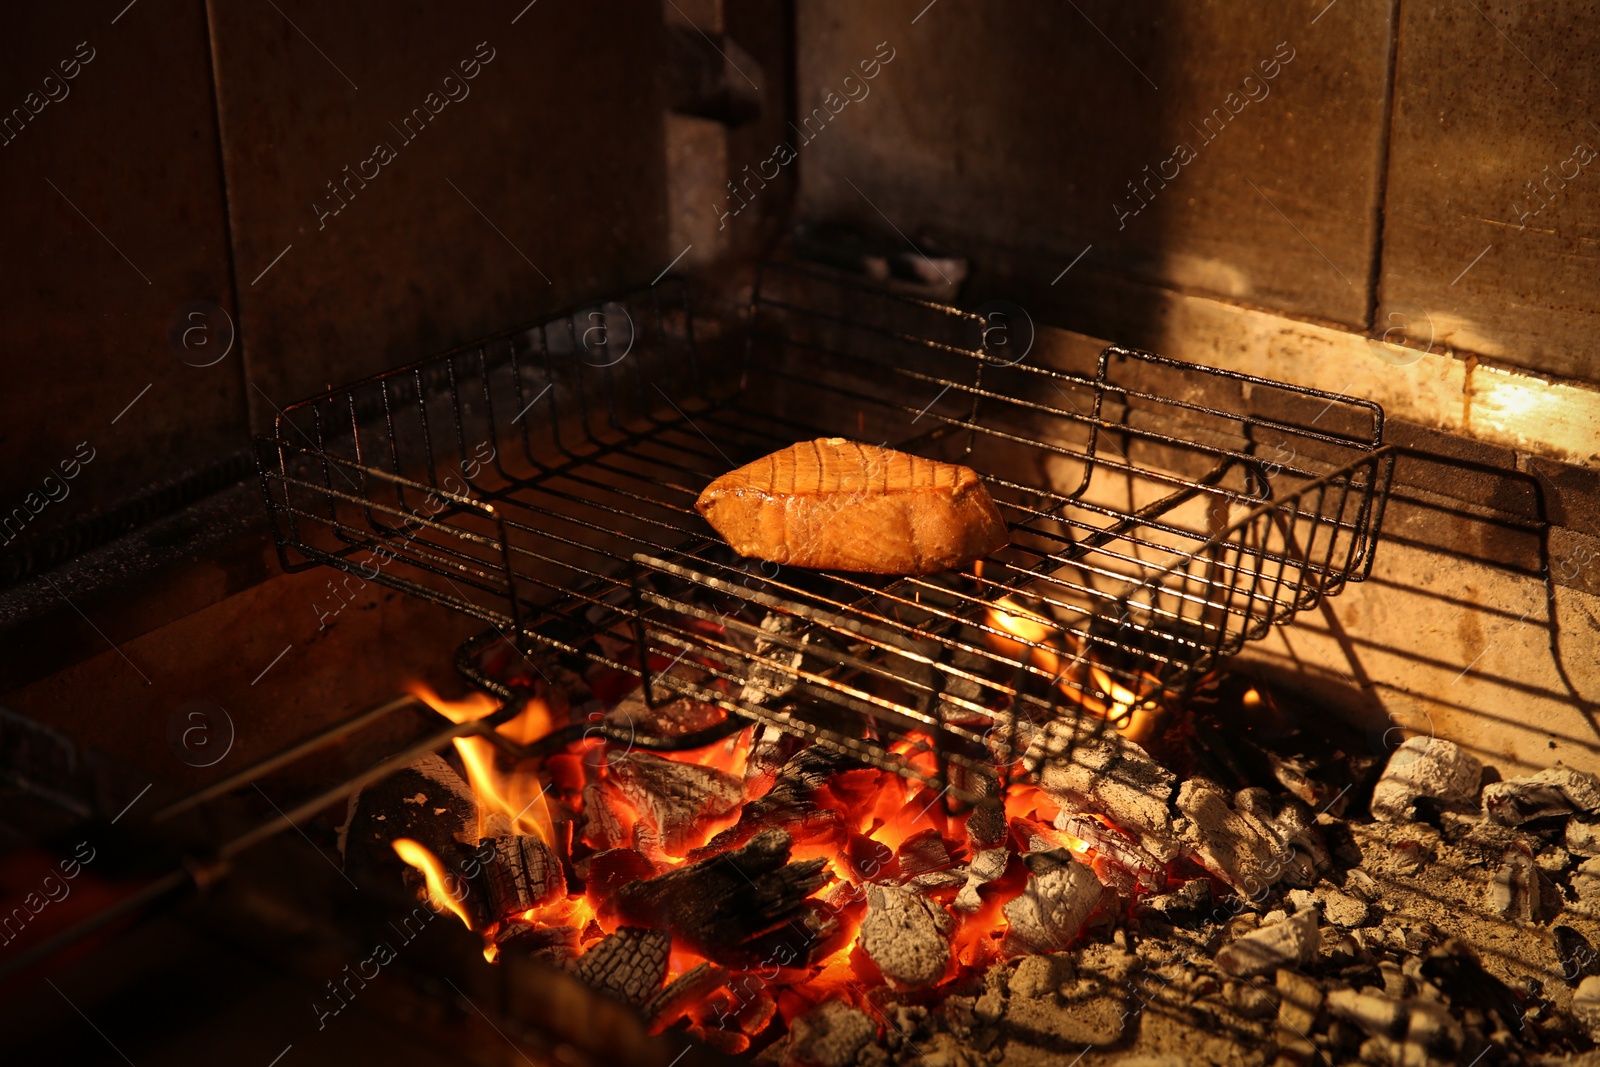 Photo of Grilling basket with tuna in oven, closeup